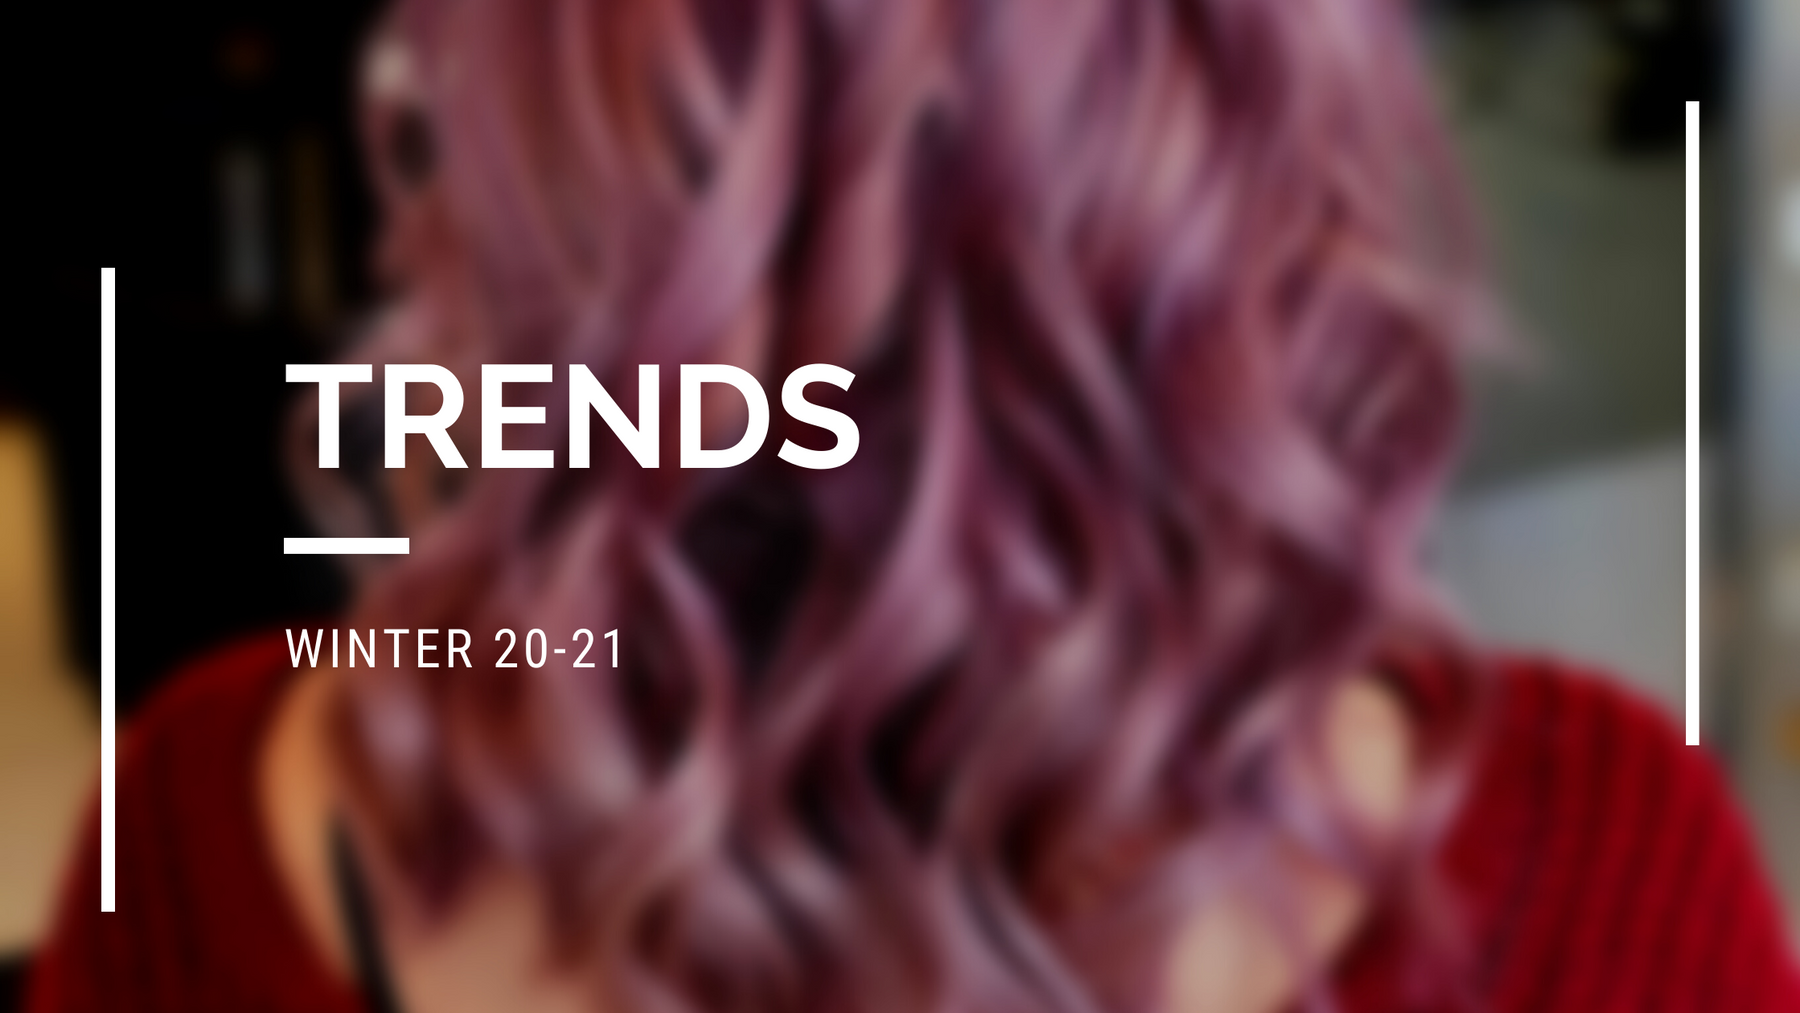 Top 10 Hair Color Trends for Winter 2020/2021